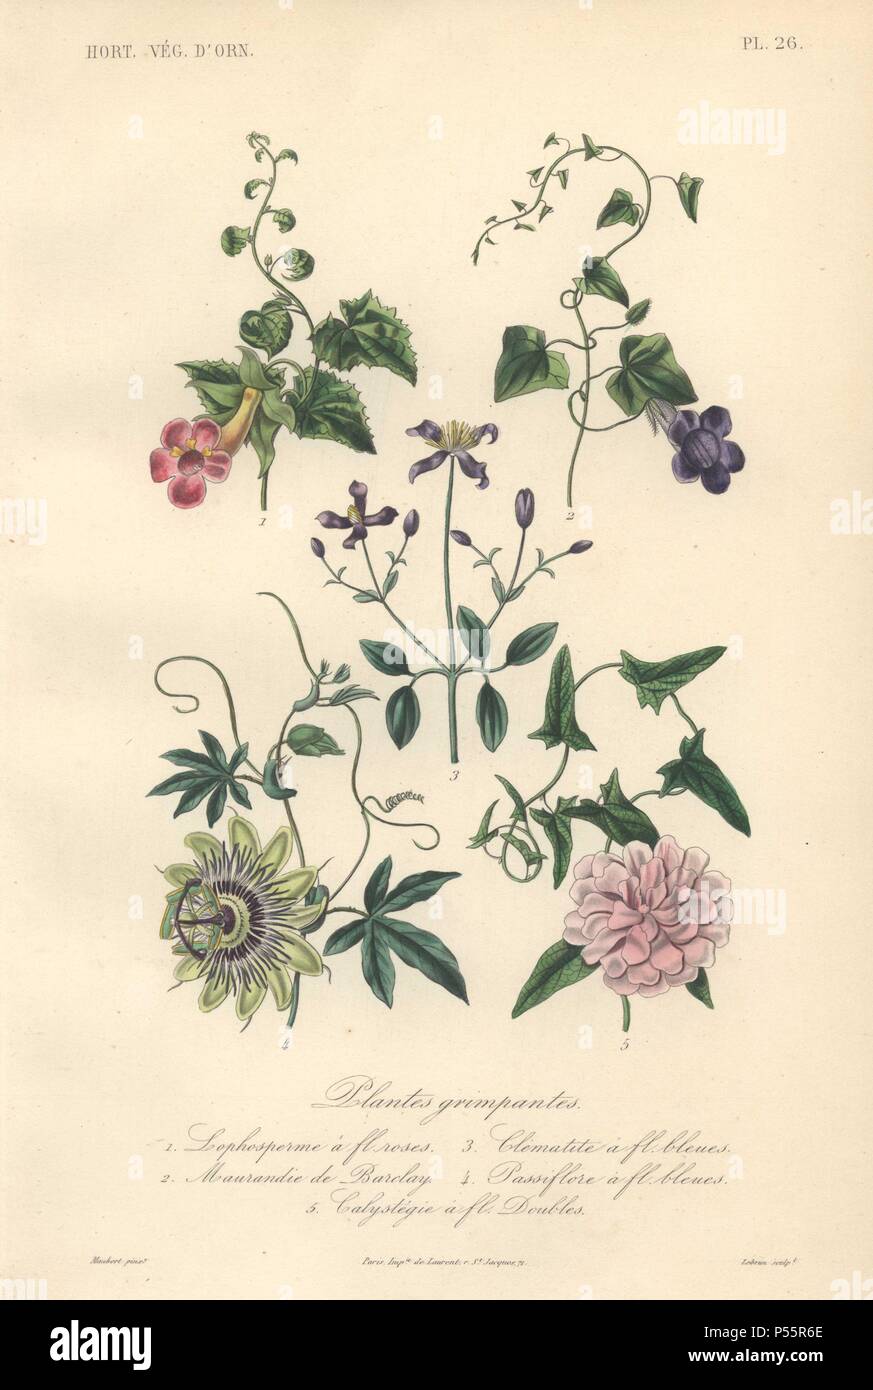 Five climbing plants including pink foxglove (Lophospermum), blue angel's trumpet (Maurandya barclayana), blue clematis (Clematis), blue passionflower (Passiflora), and pink double bindweed (Calystegia). . . Plantes grimpantes: 1) Lophosperme a fleurs roses 2) Maurandie de Barclay 3) Clematite a fleurs bleues 4) Passiflore a fleurs bleues 5) Calystegie a fleurs doubles . . Handcolored lithograph drawn by Edouard Maubert from Herincq's 'Le Regne Vegetal' 1865. Stock Photo